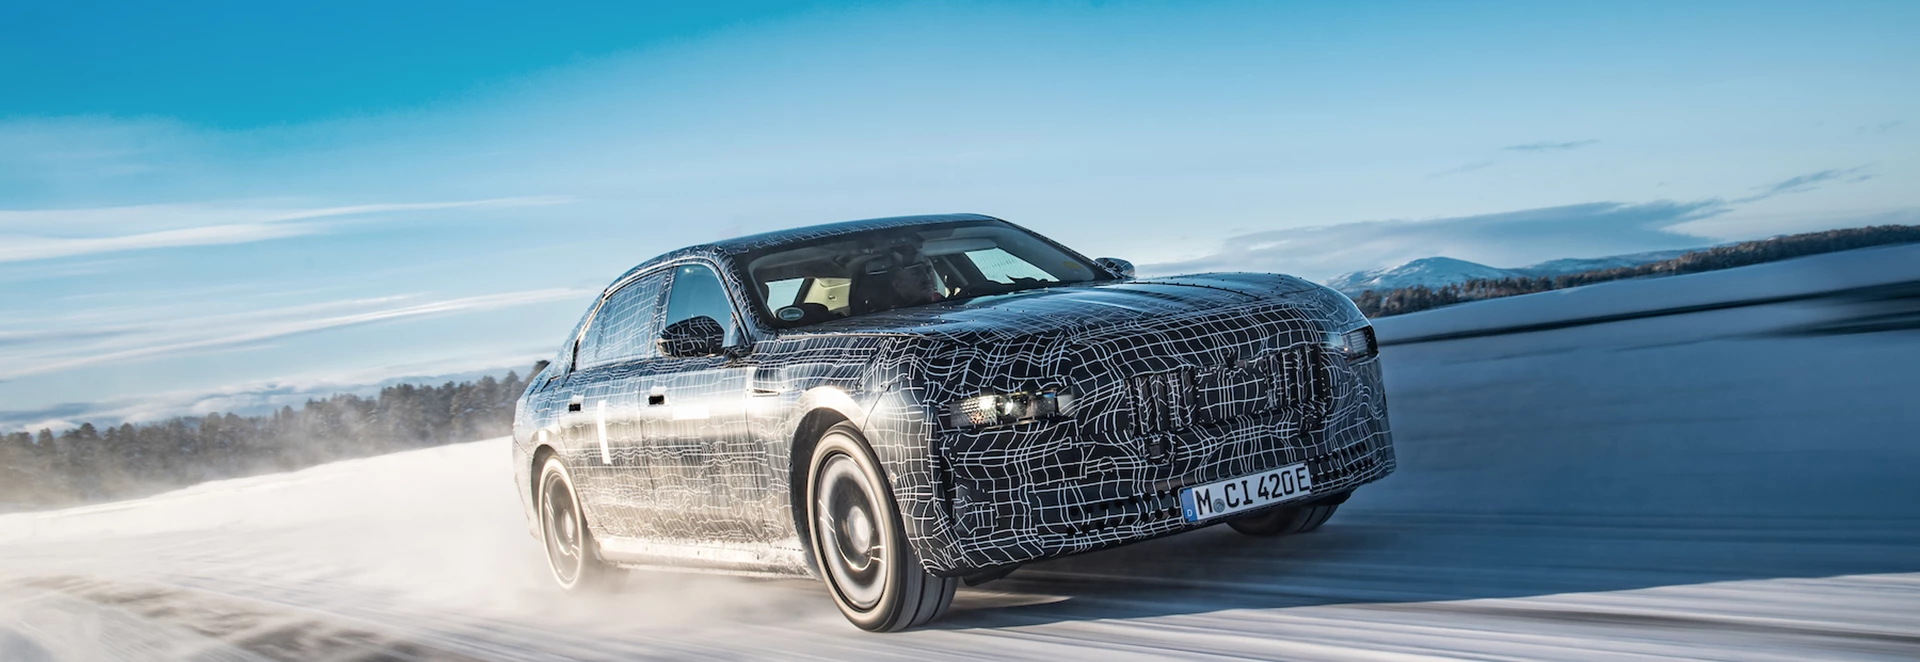 BMW reveals teaser images of electric i7 in winter testing ahead of 2022 launch 